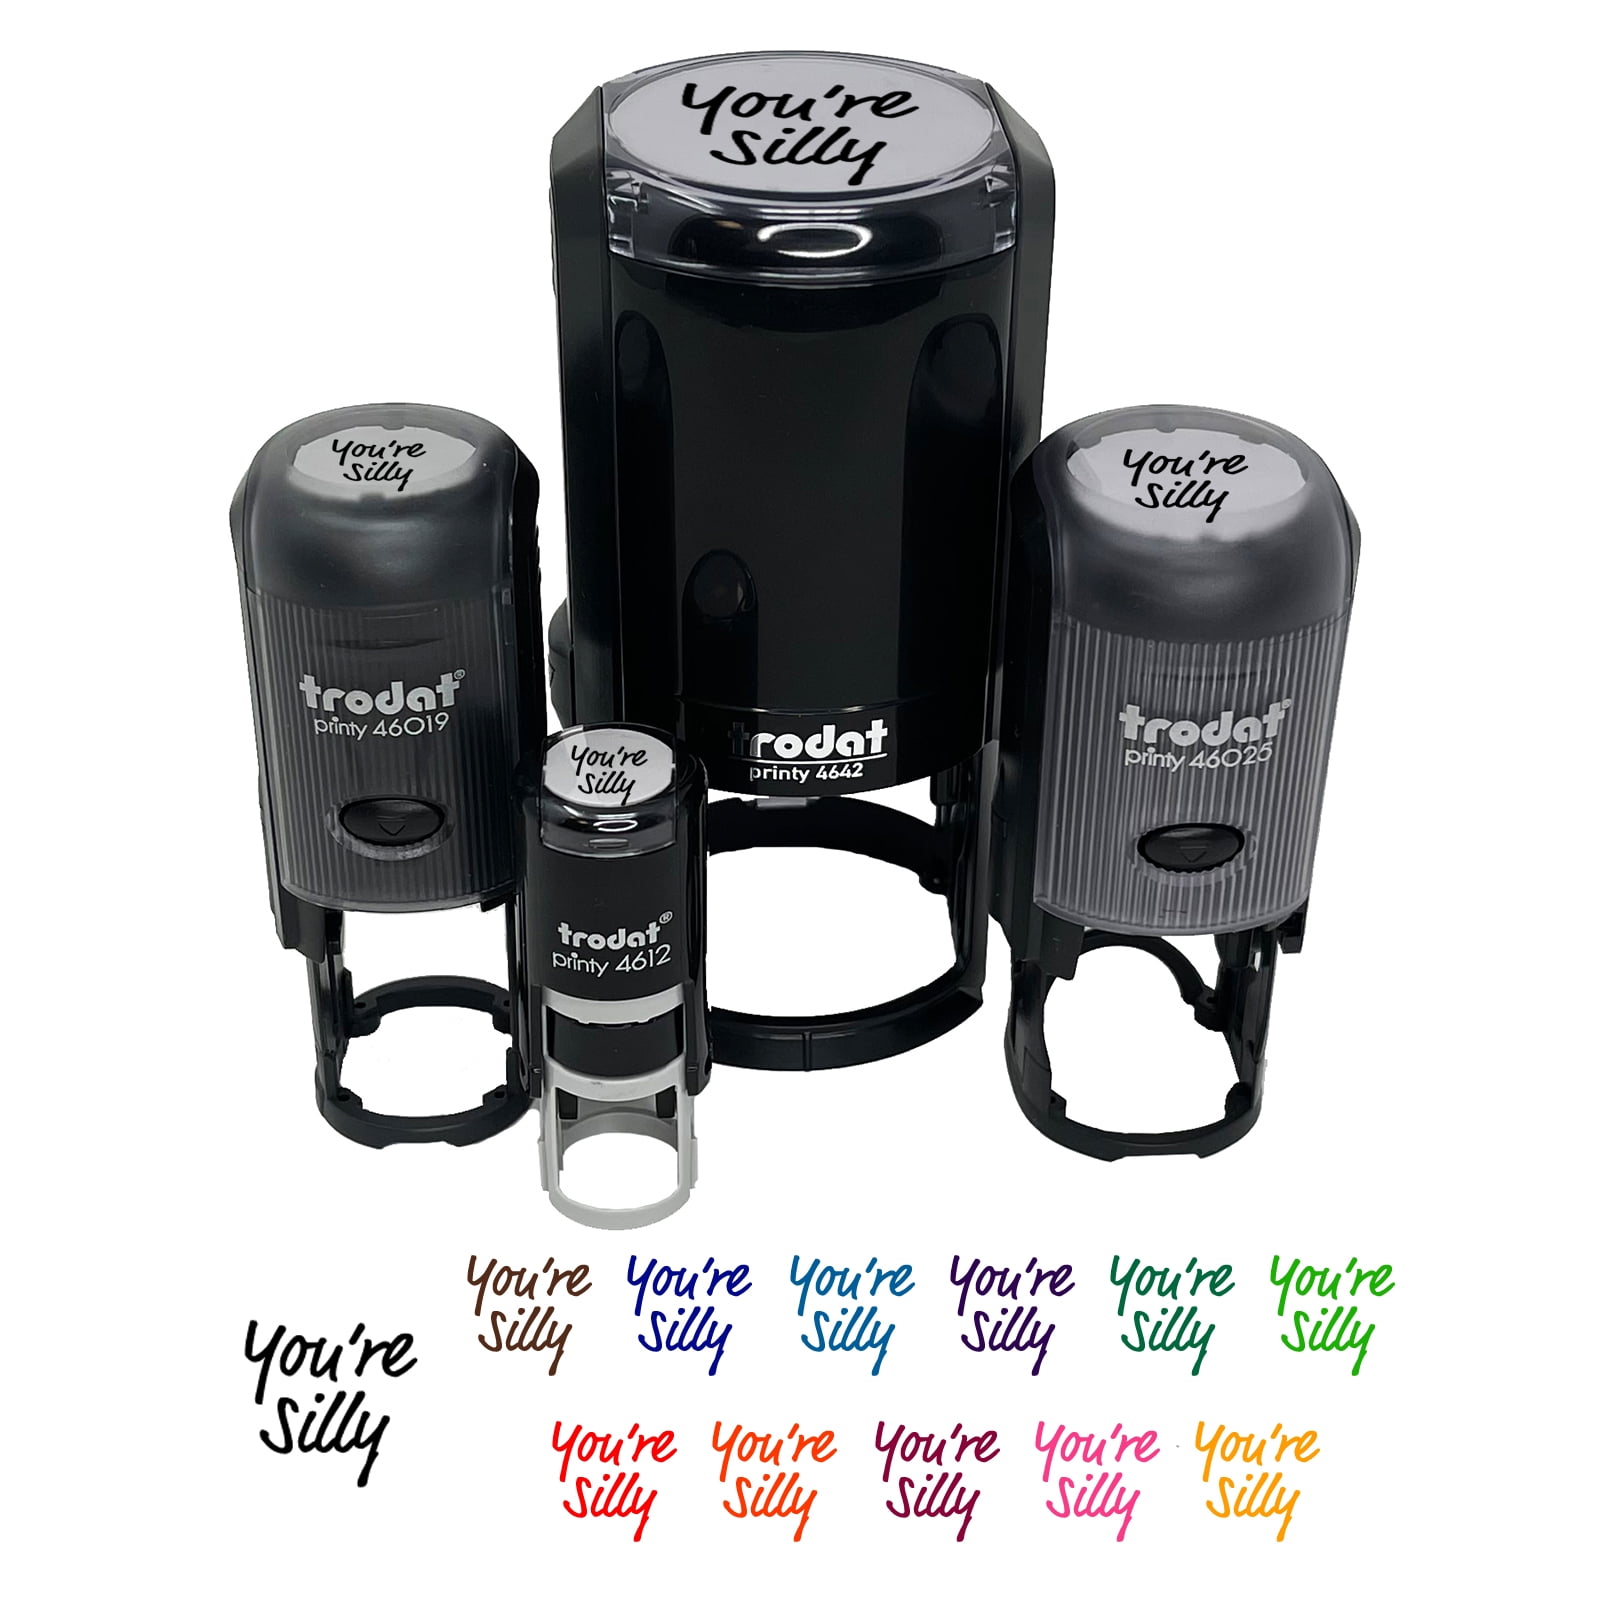 Stamp Joy - Premium Refill Ink for Self Inking Stamps and Stamp